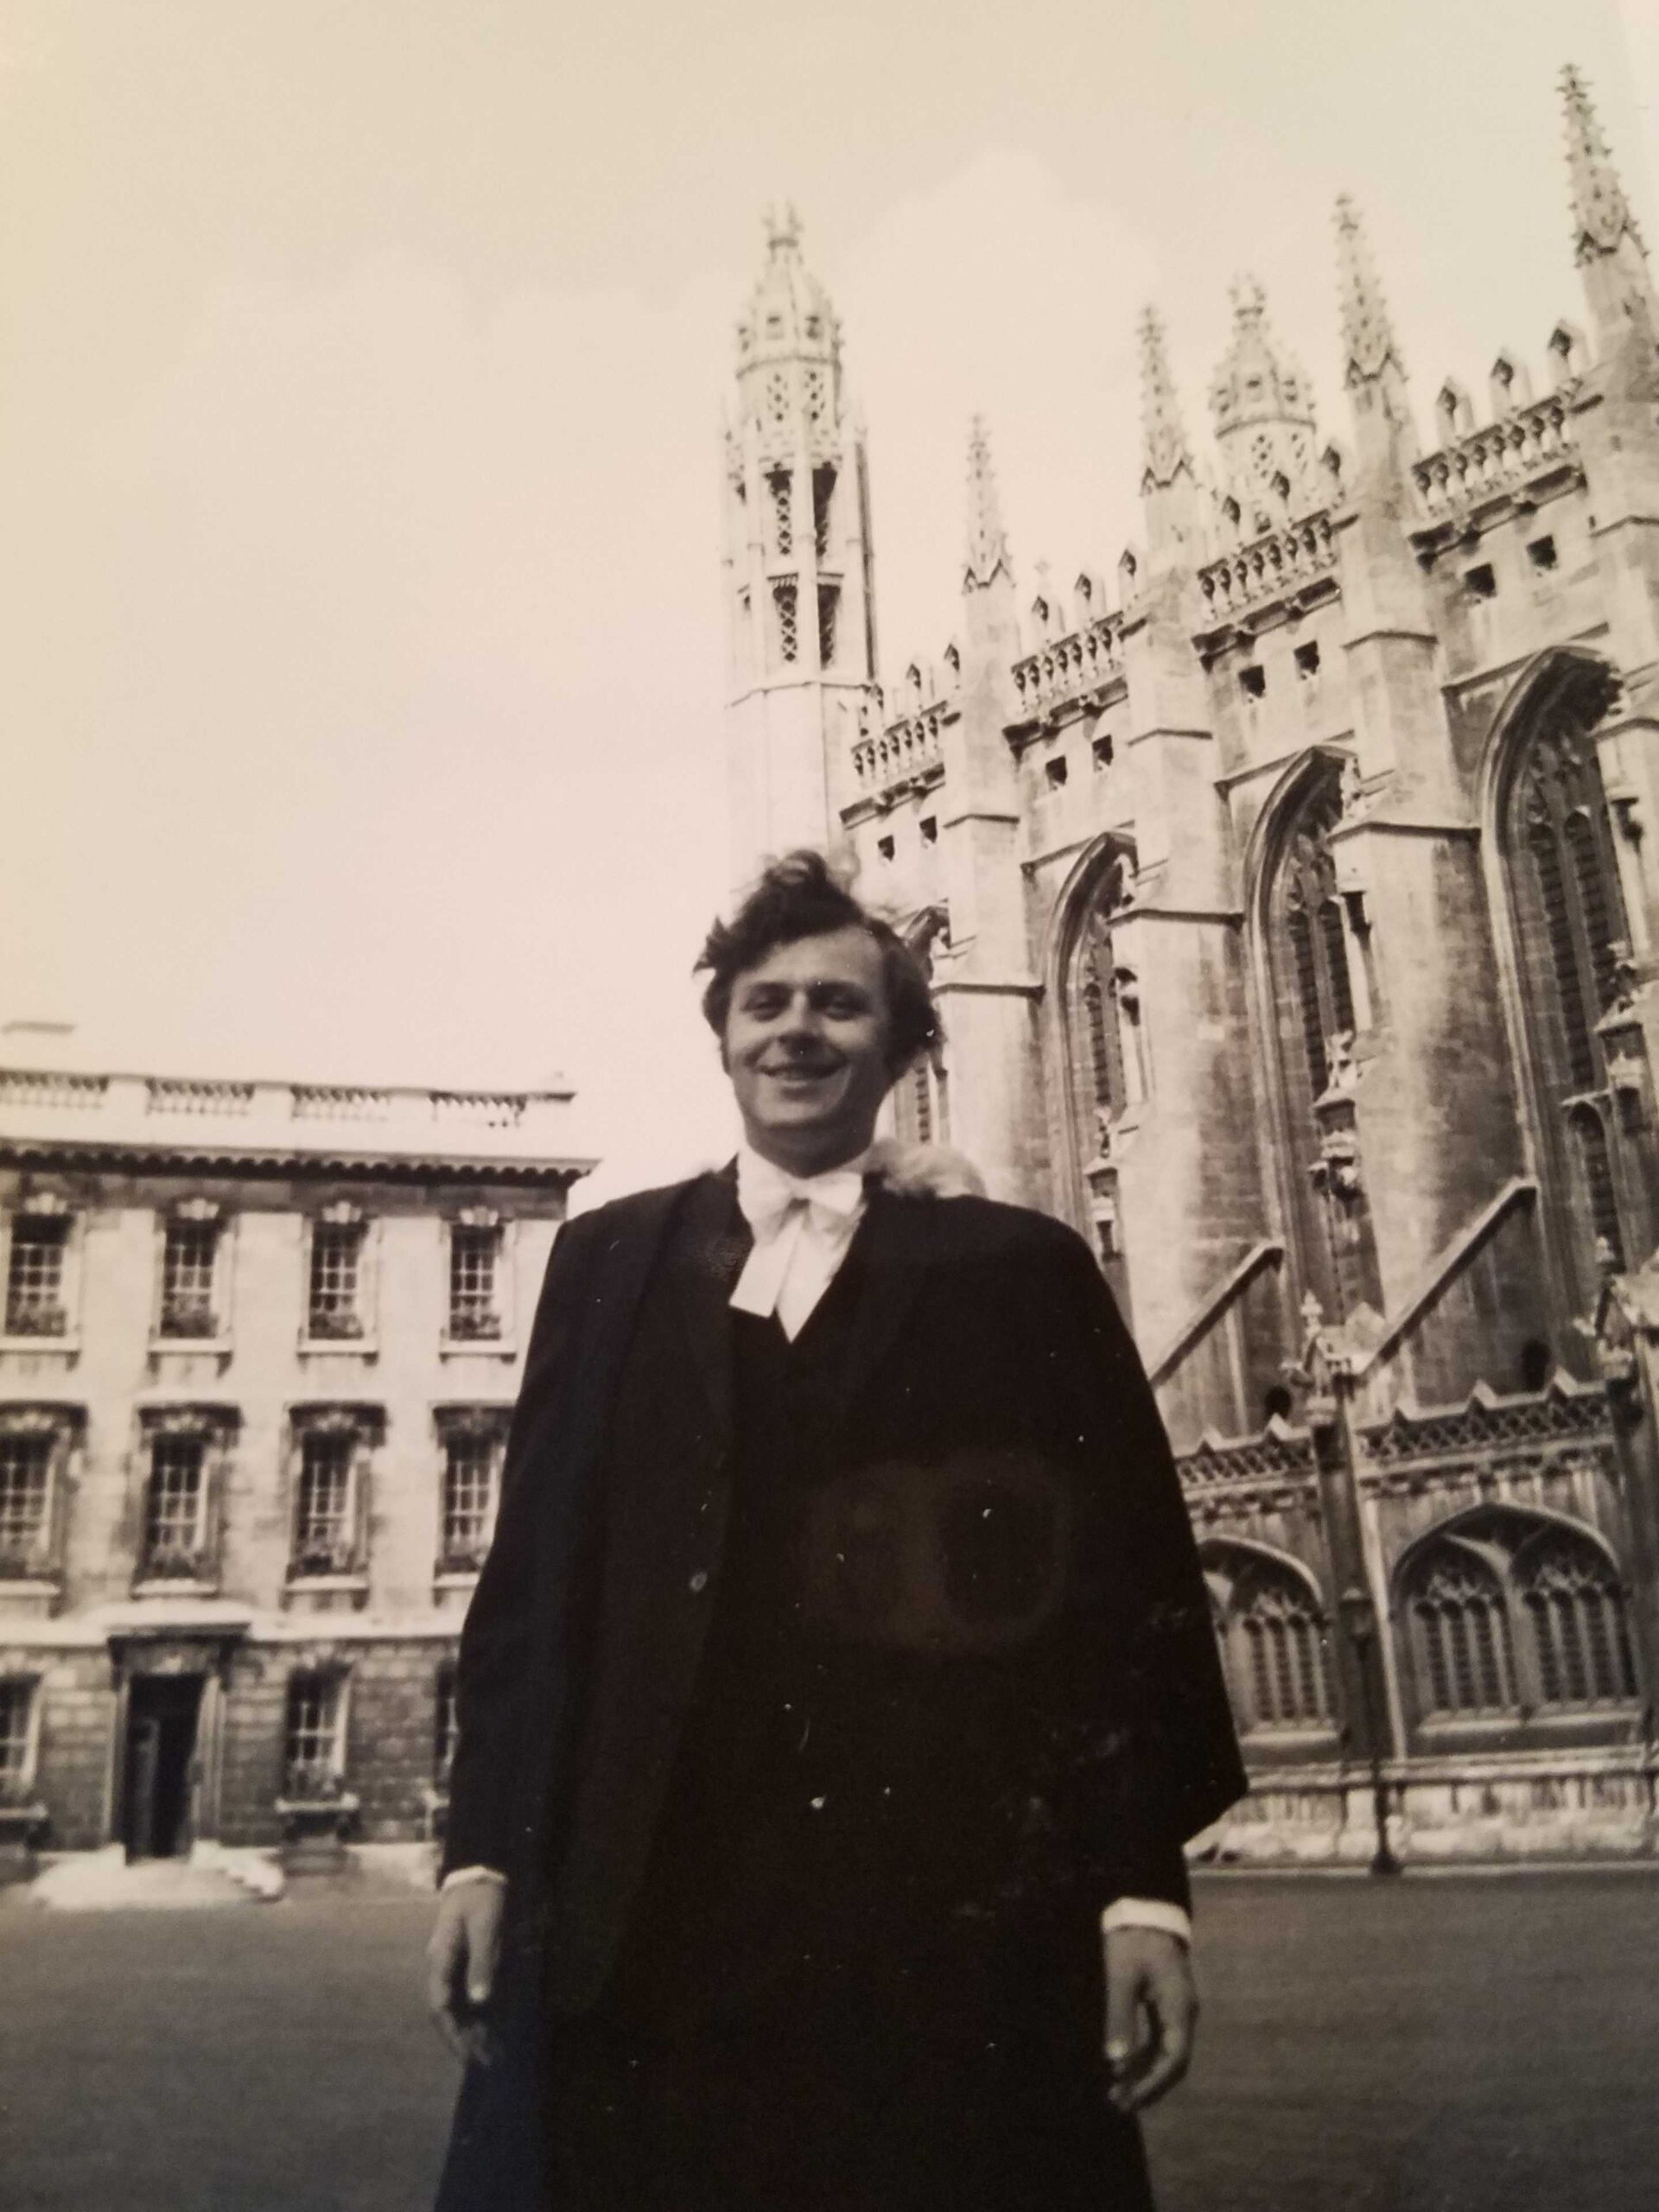 Gene Stelzig getting his degree at King's College, Cambridge as a Thouron Scholar, May 1969